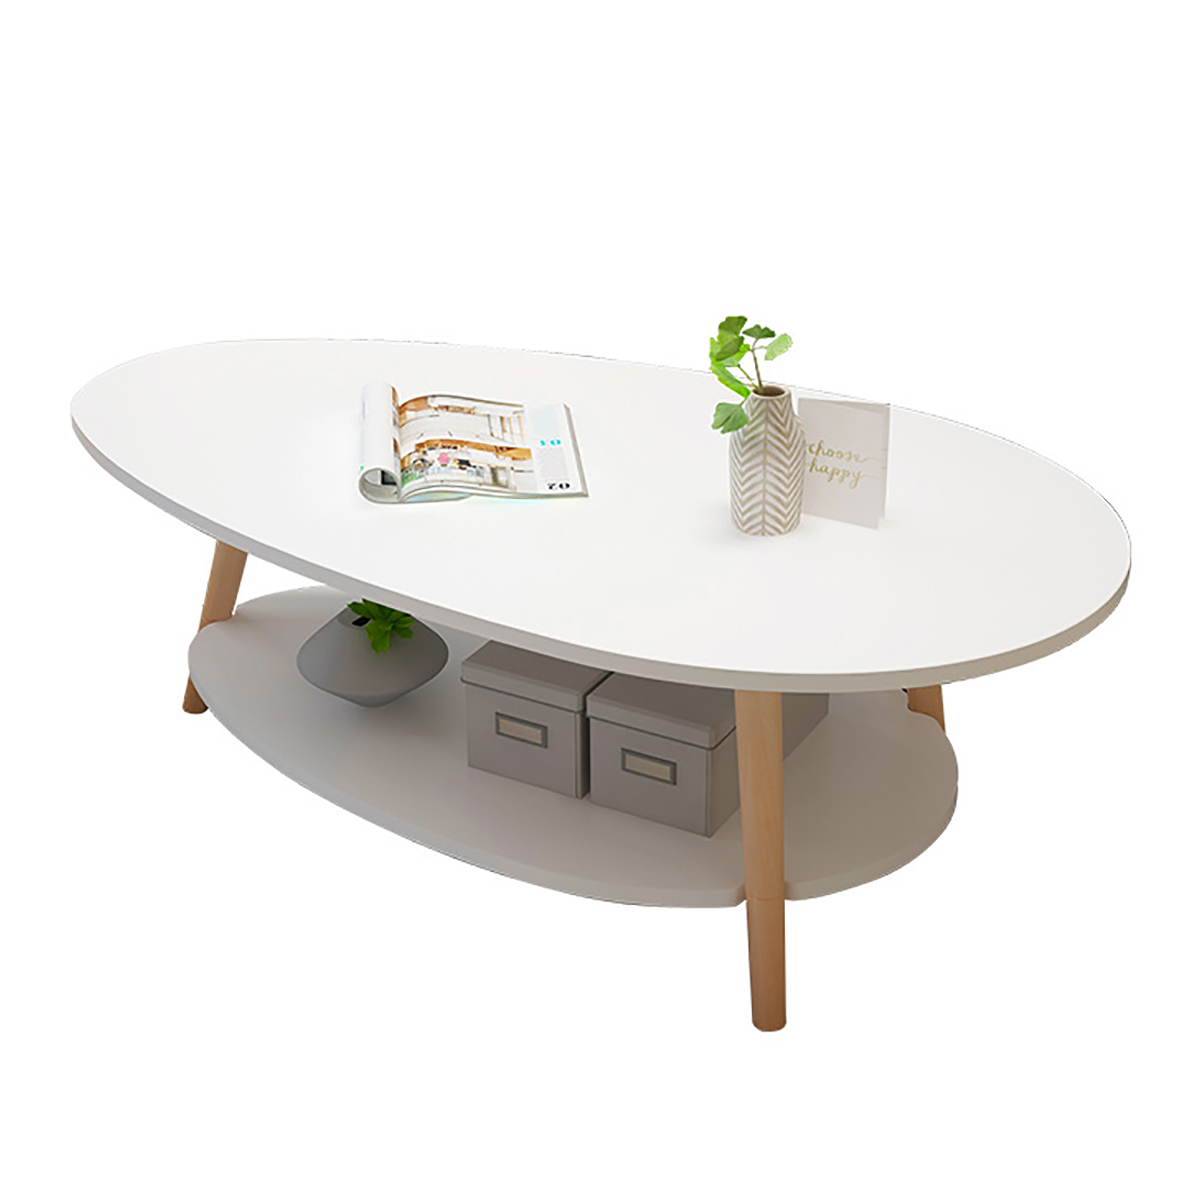 Double-Layers-Coffee-Table-Modern-Laptop-Desk-Living-Room-Round-Table-Writing-Study-Table-Storage-Ra-1752142-8